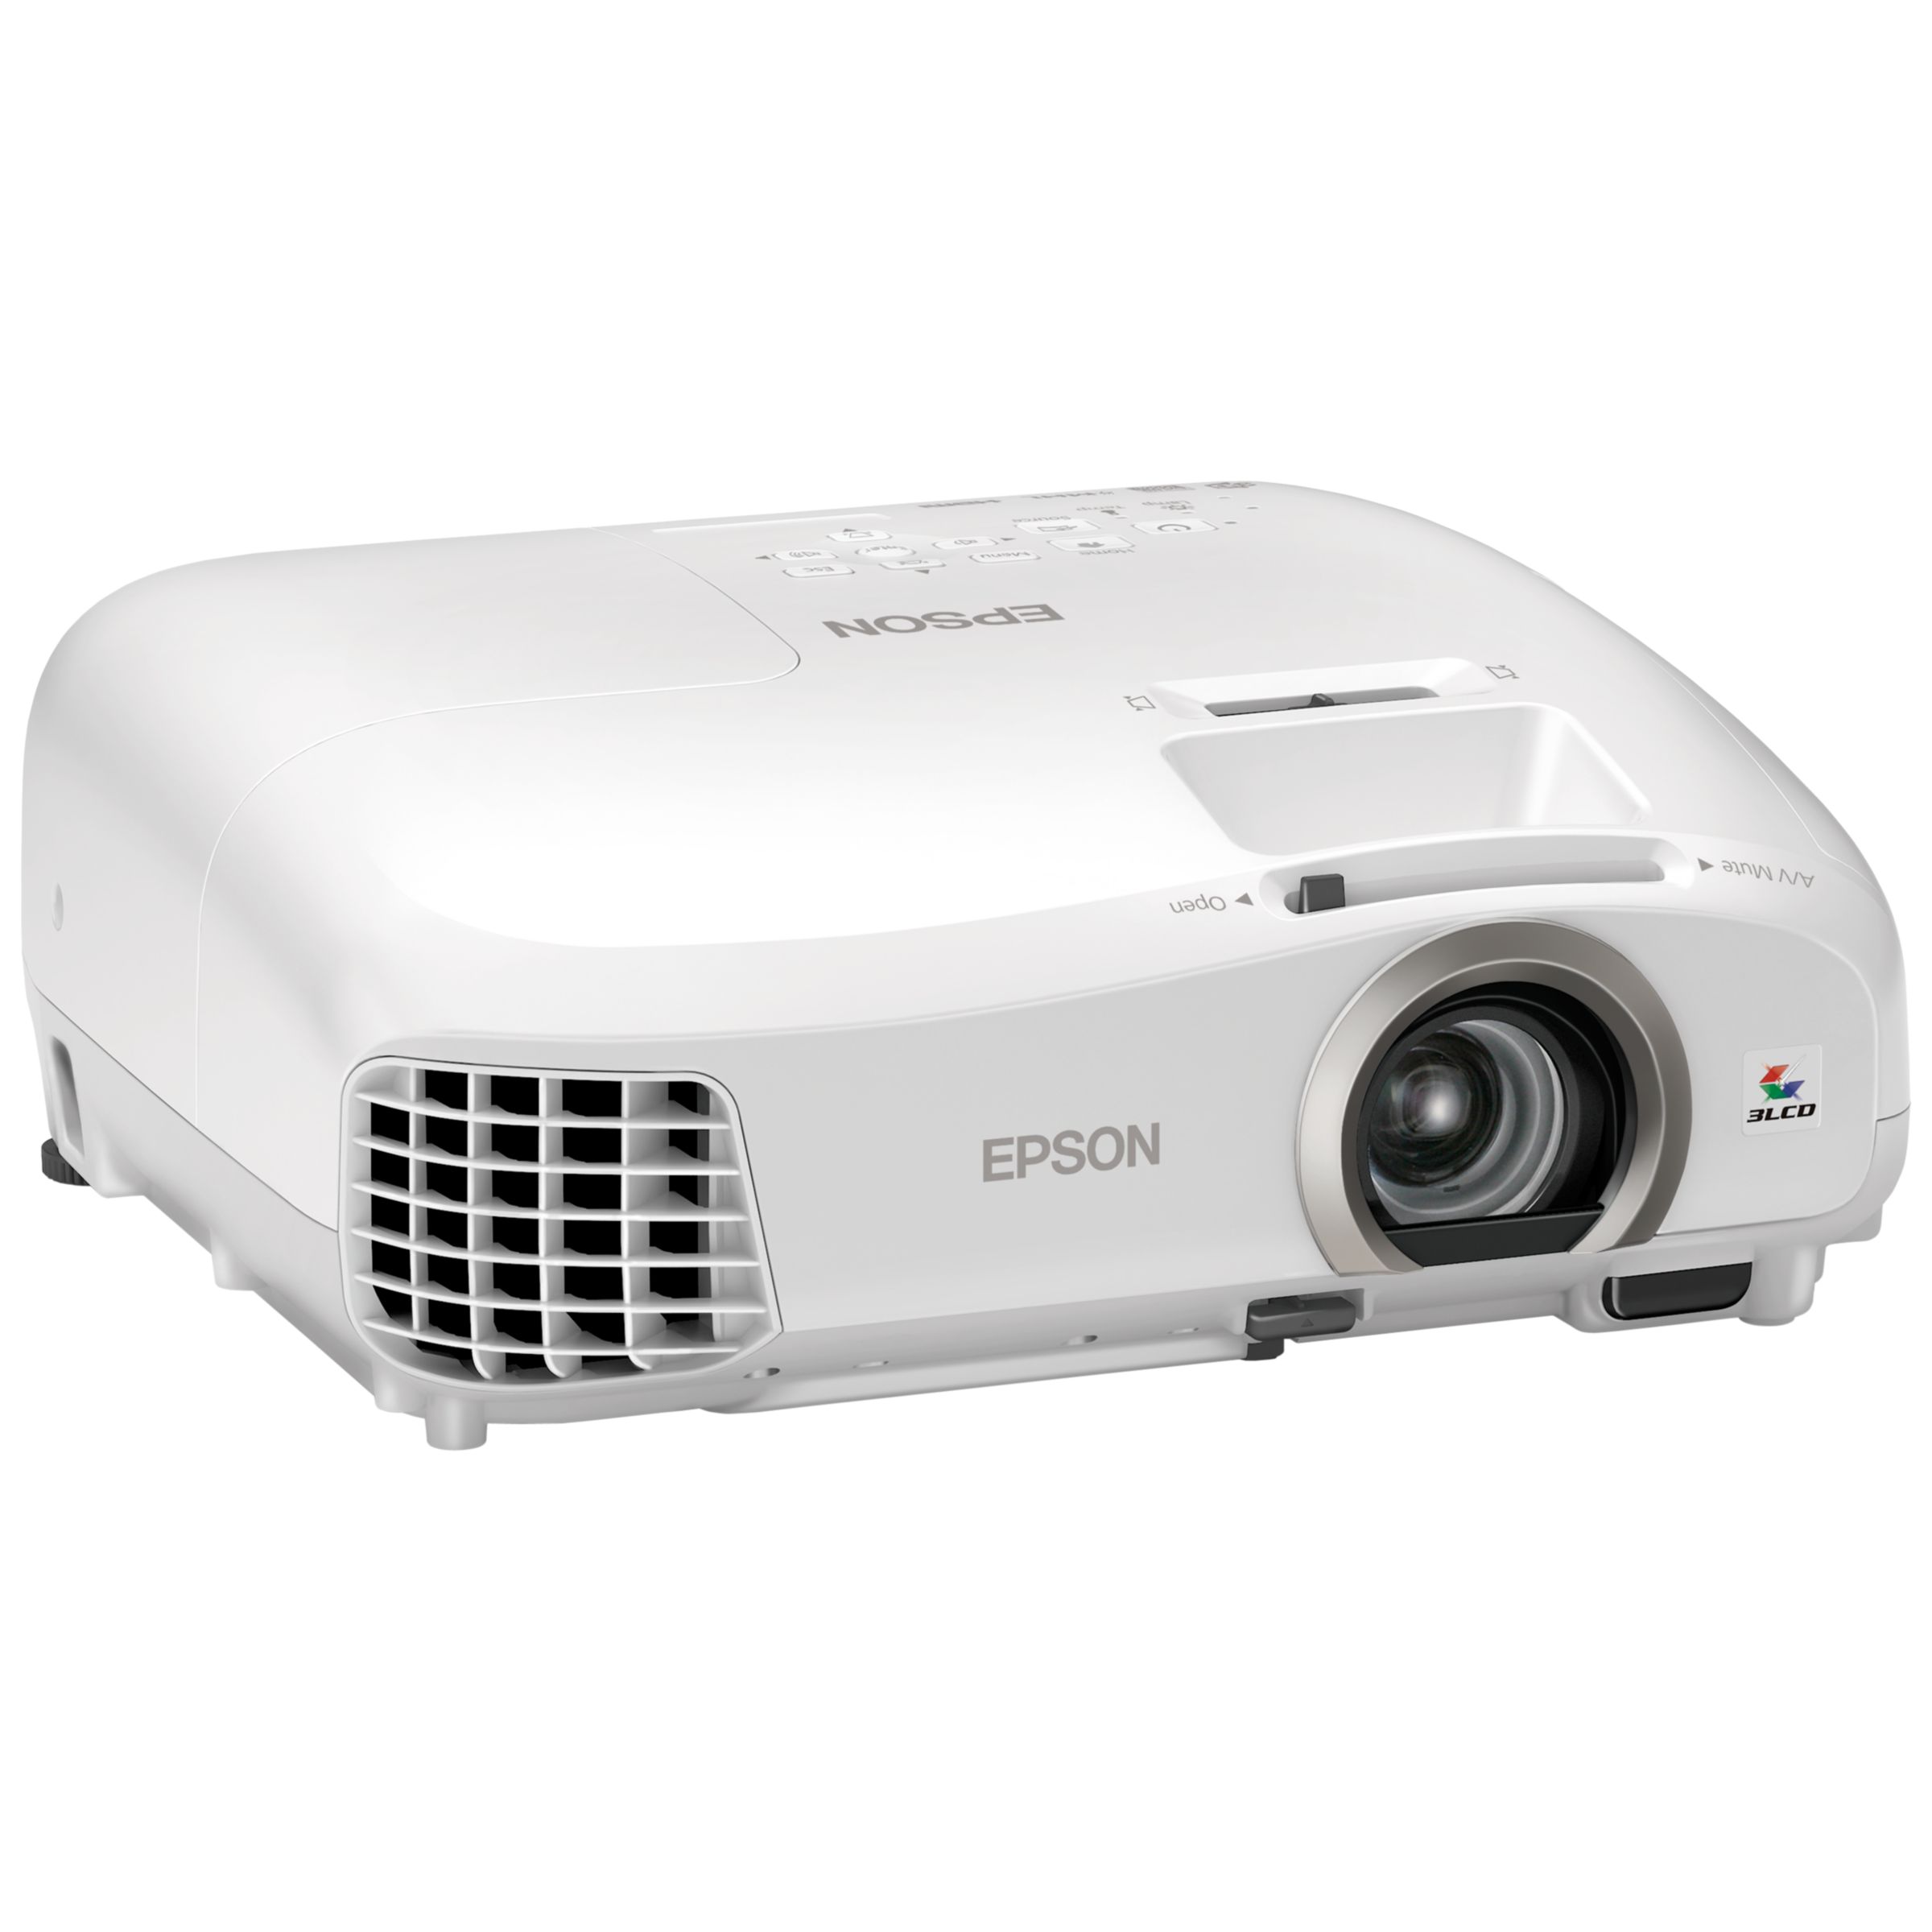 Epson EH-TW5300 Full HD 1080p 3D Projector, 2200 Lumens at John Lewis